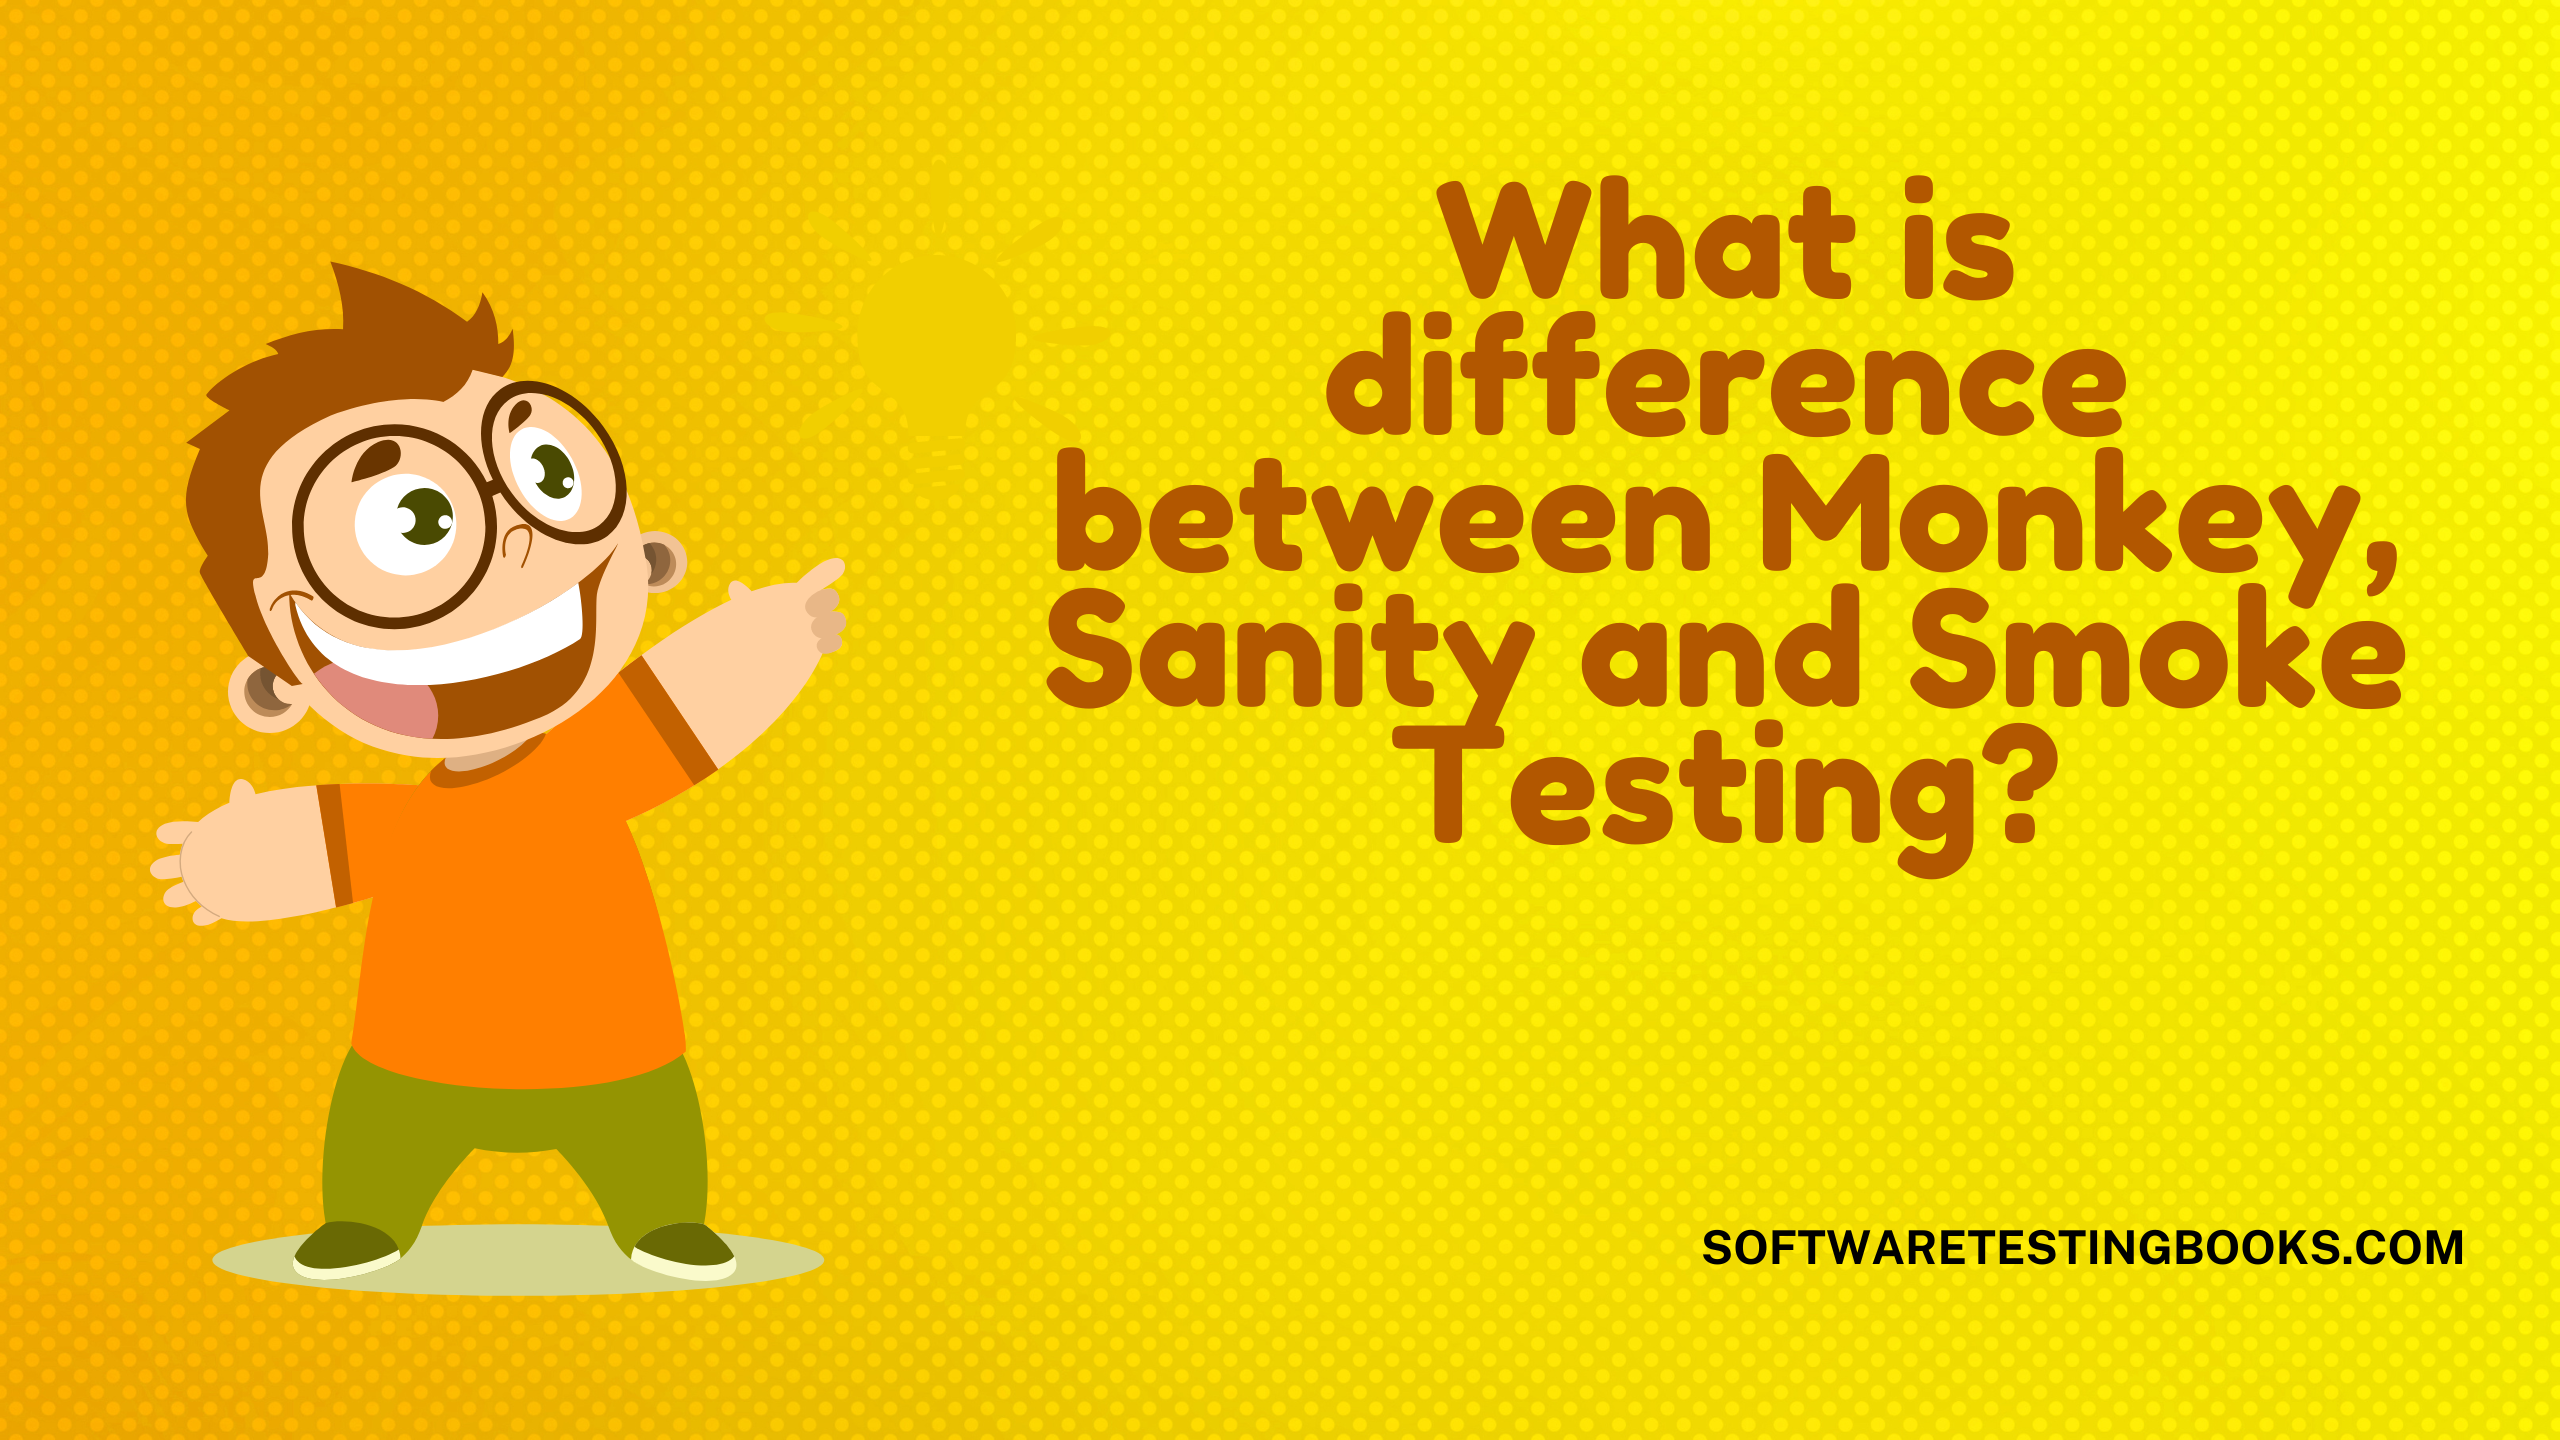 What is difference between Monkey, Sanity and Smoke Testing? - softwaretestingbooks.com